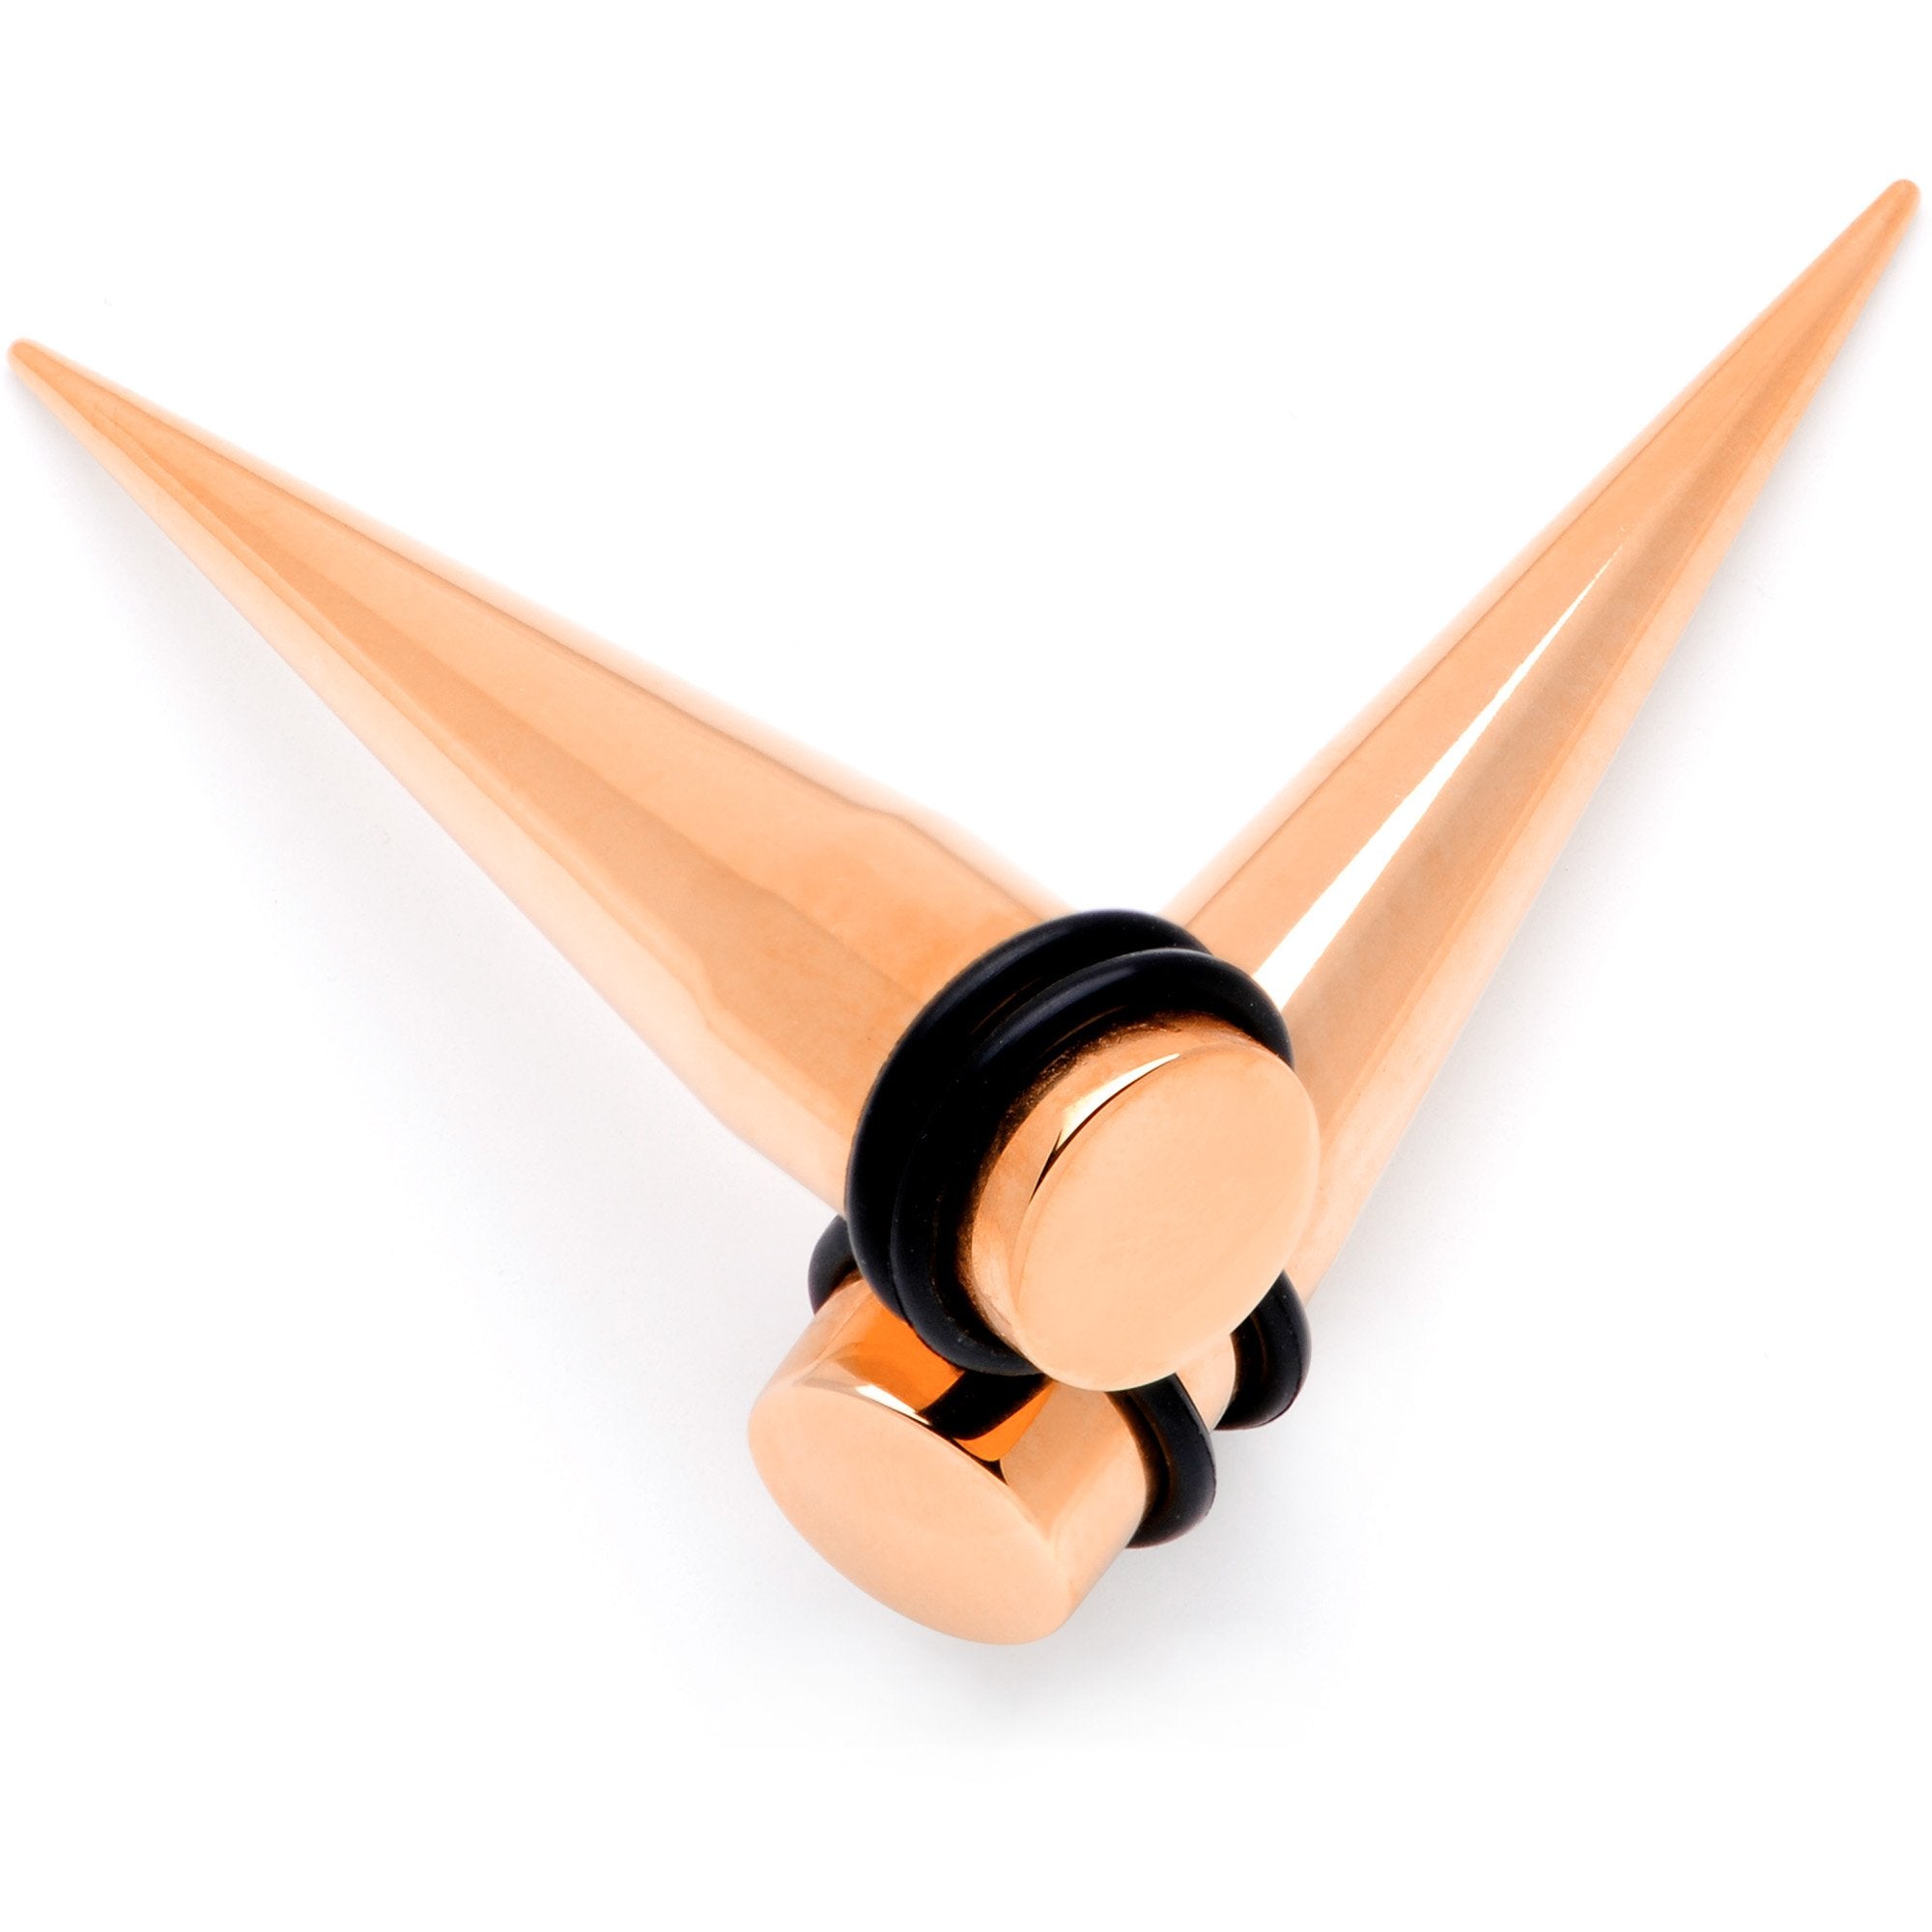 Rose Gold Tone Anodized Straight Taper Set Available in Sizes  14 Gauge to 00 Gauge